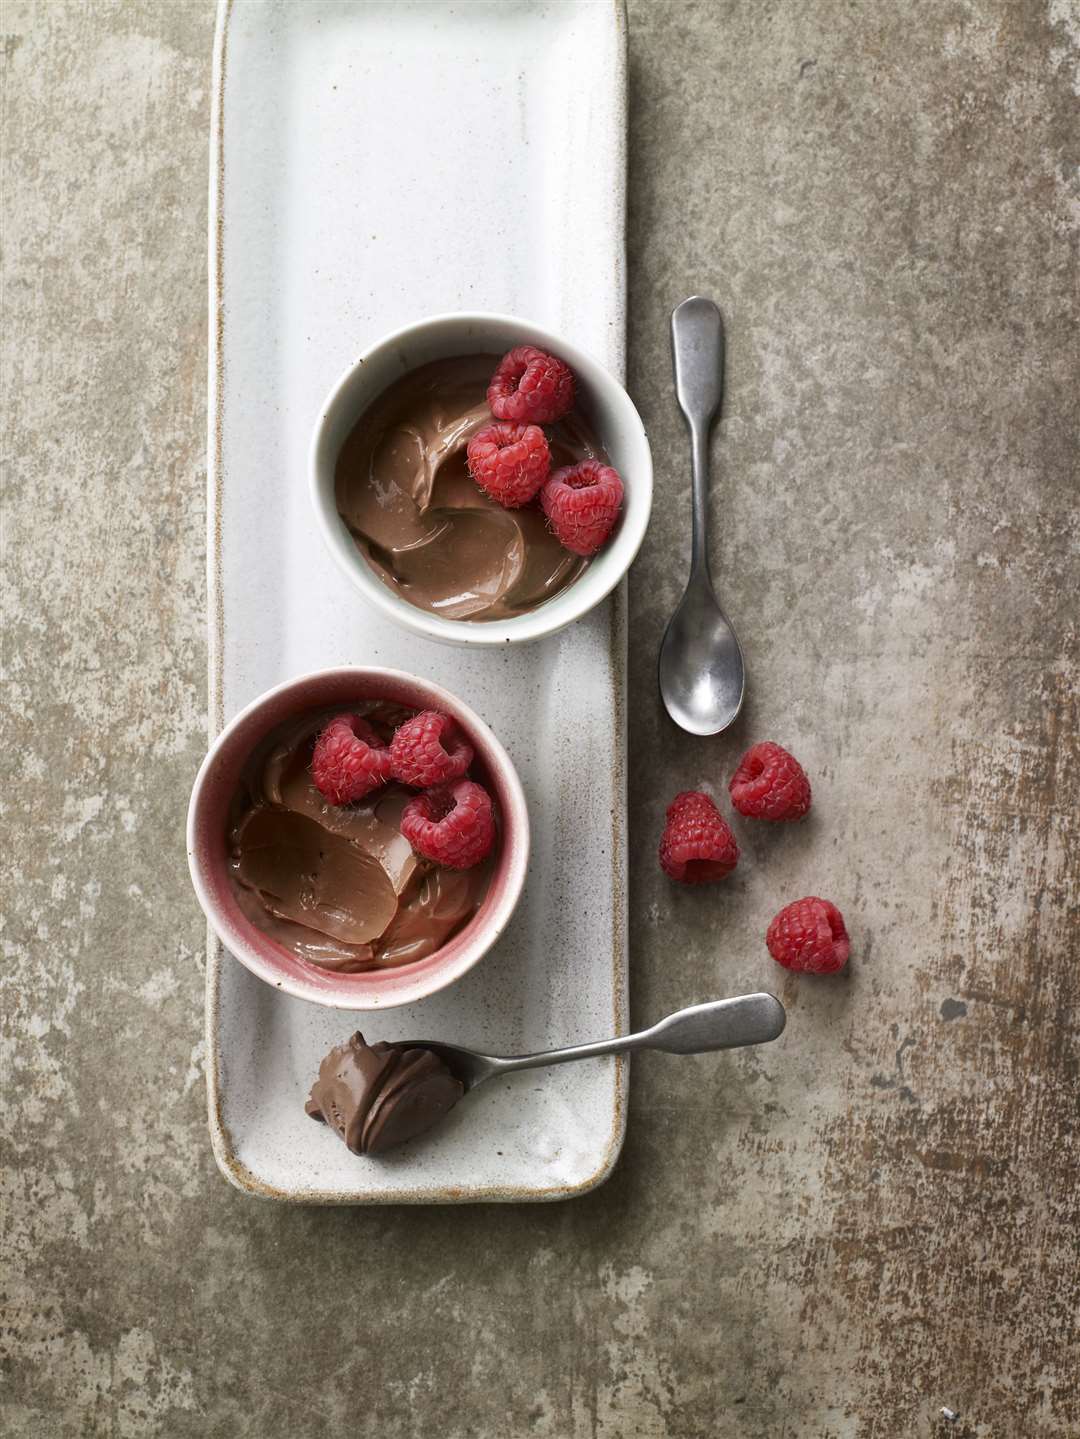 Phil Vickery's silky chocolate mousse. Picture: Kyle Books/Kate Whitaker/PA